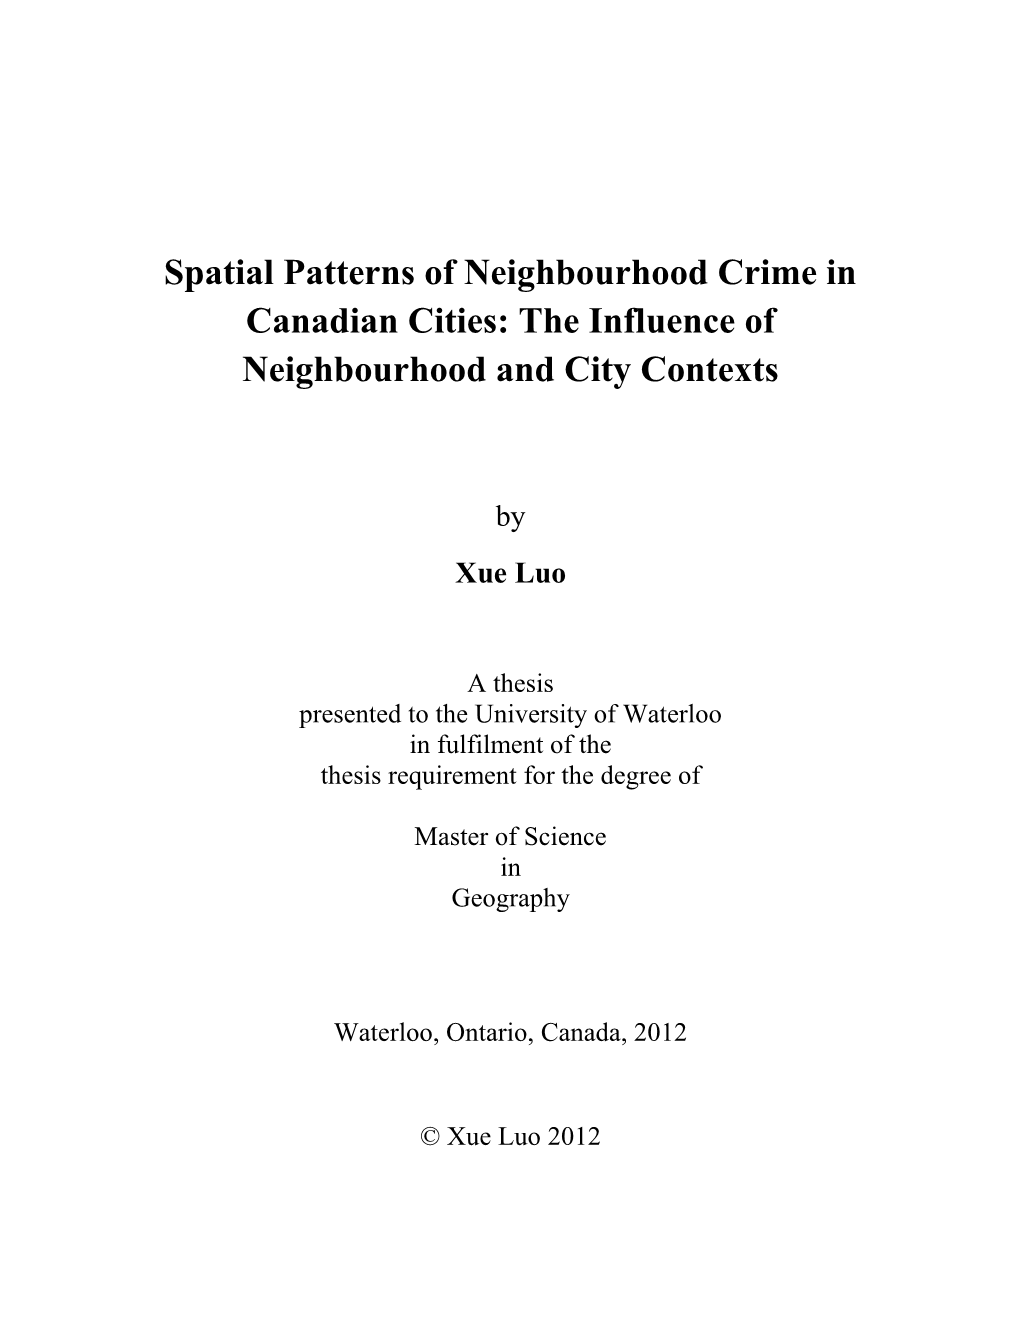 Spatial Patterns of Neighbourhood Crime in Canadian Cities: the Influence of Neighbourhood and City Contexts